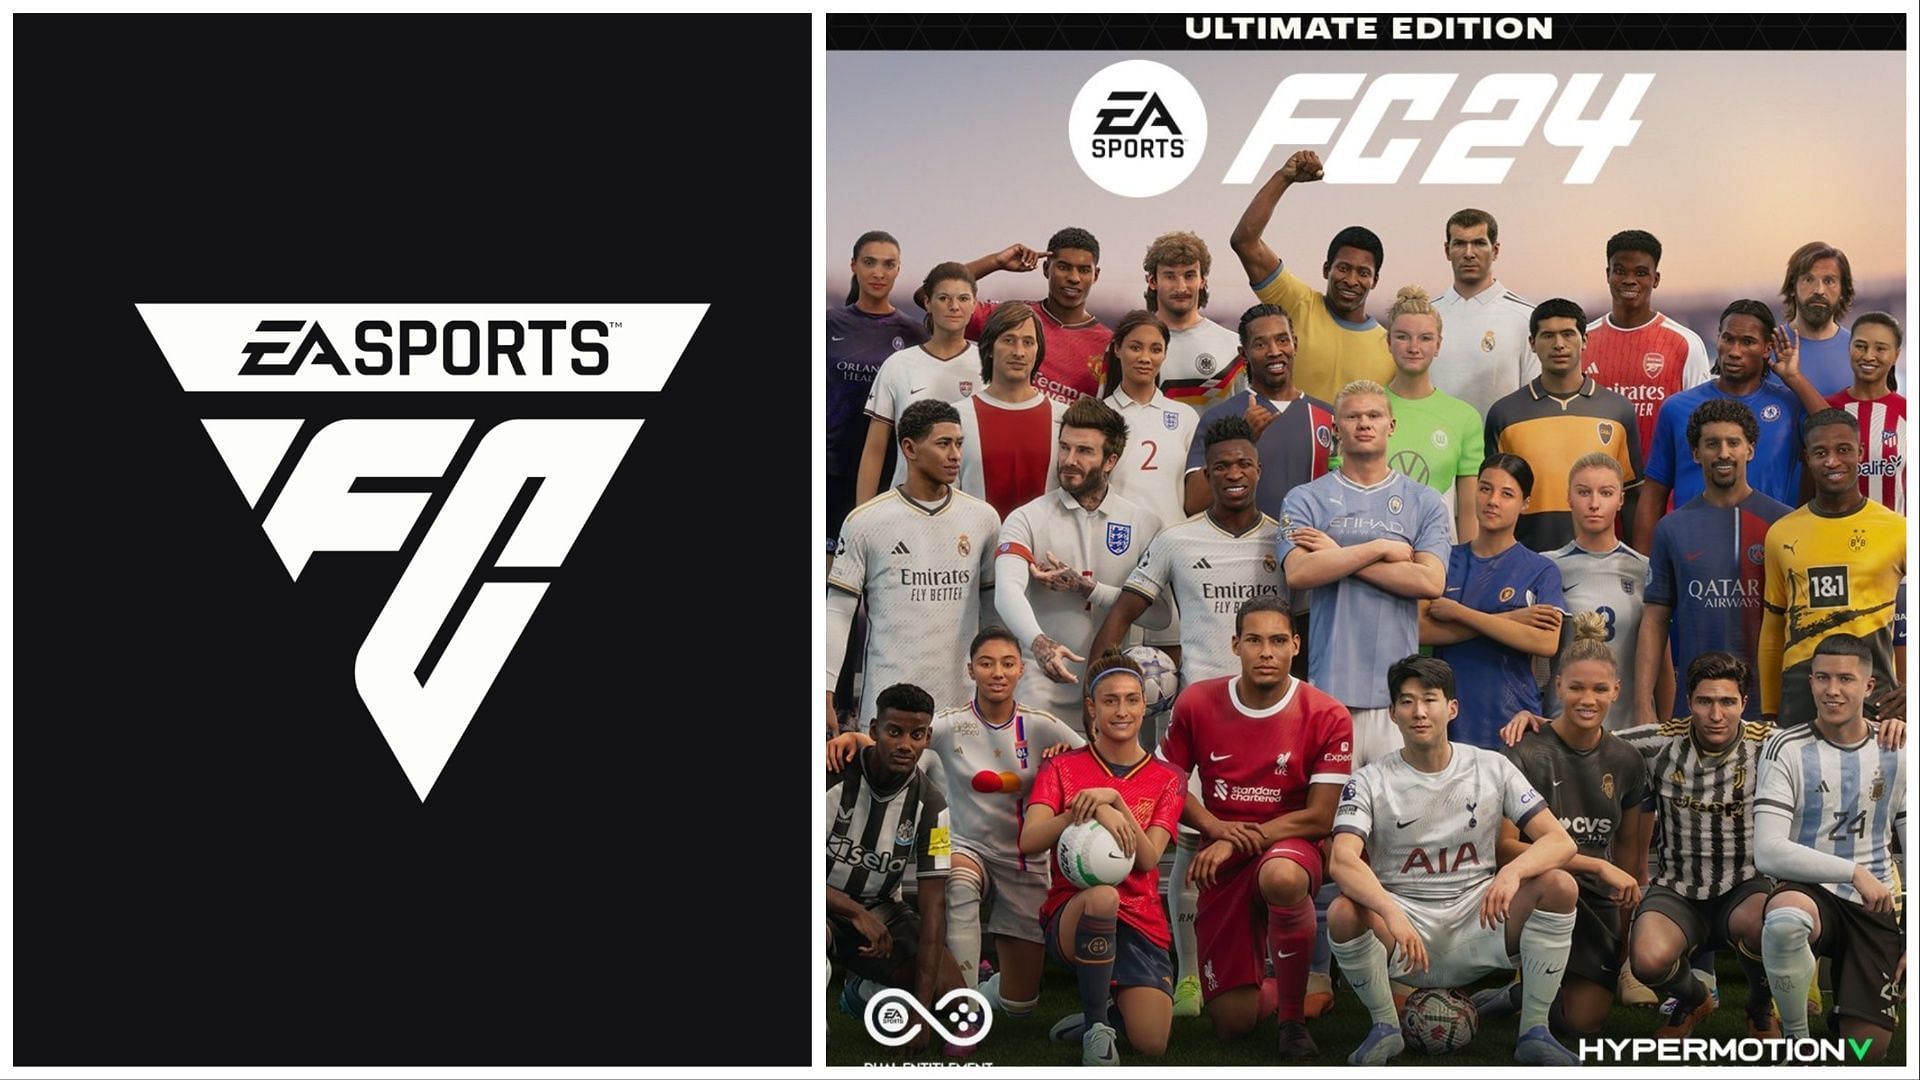 Welcome to the Club: EA SPORTS FC 24 officially launches with  fully-licensed Atlanta United